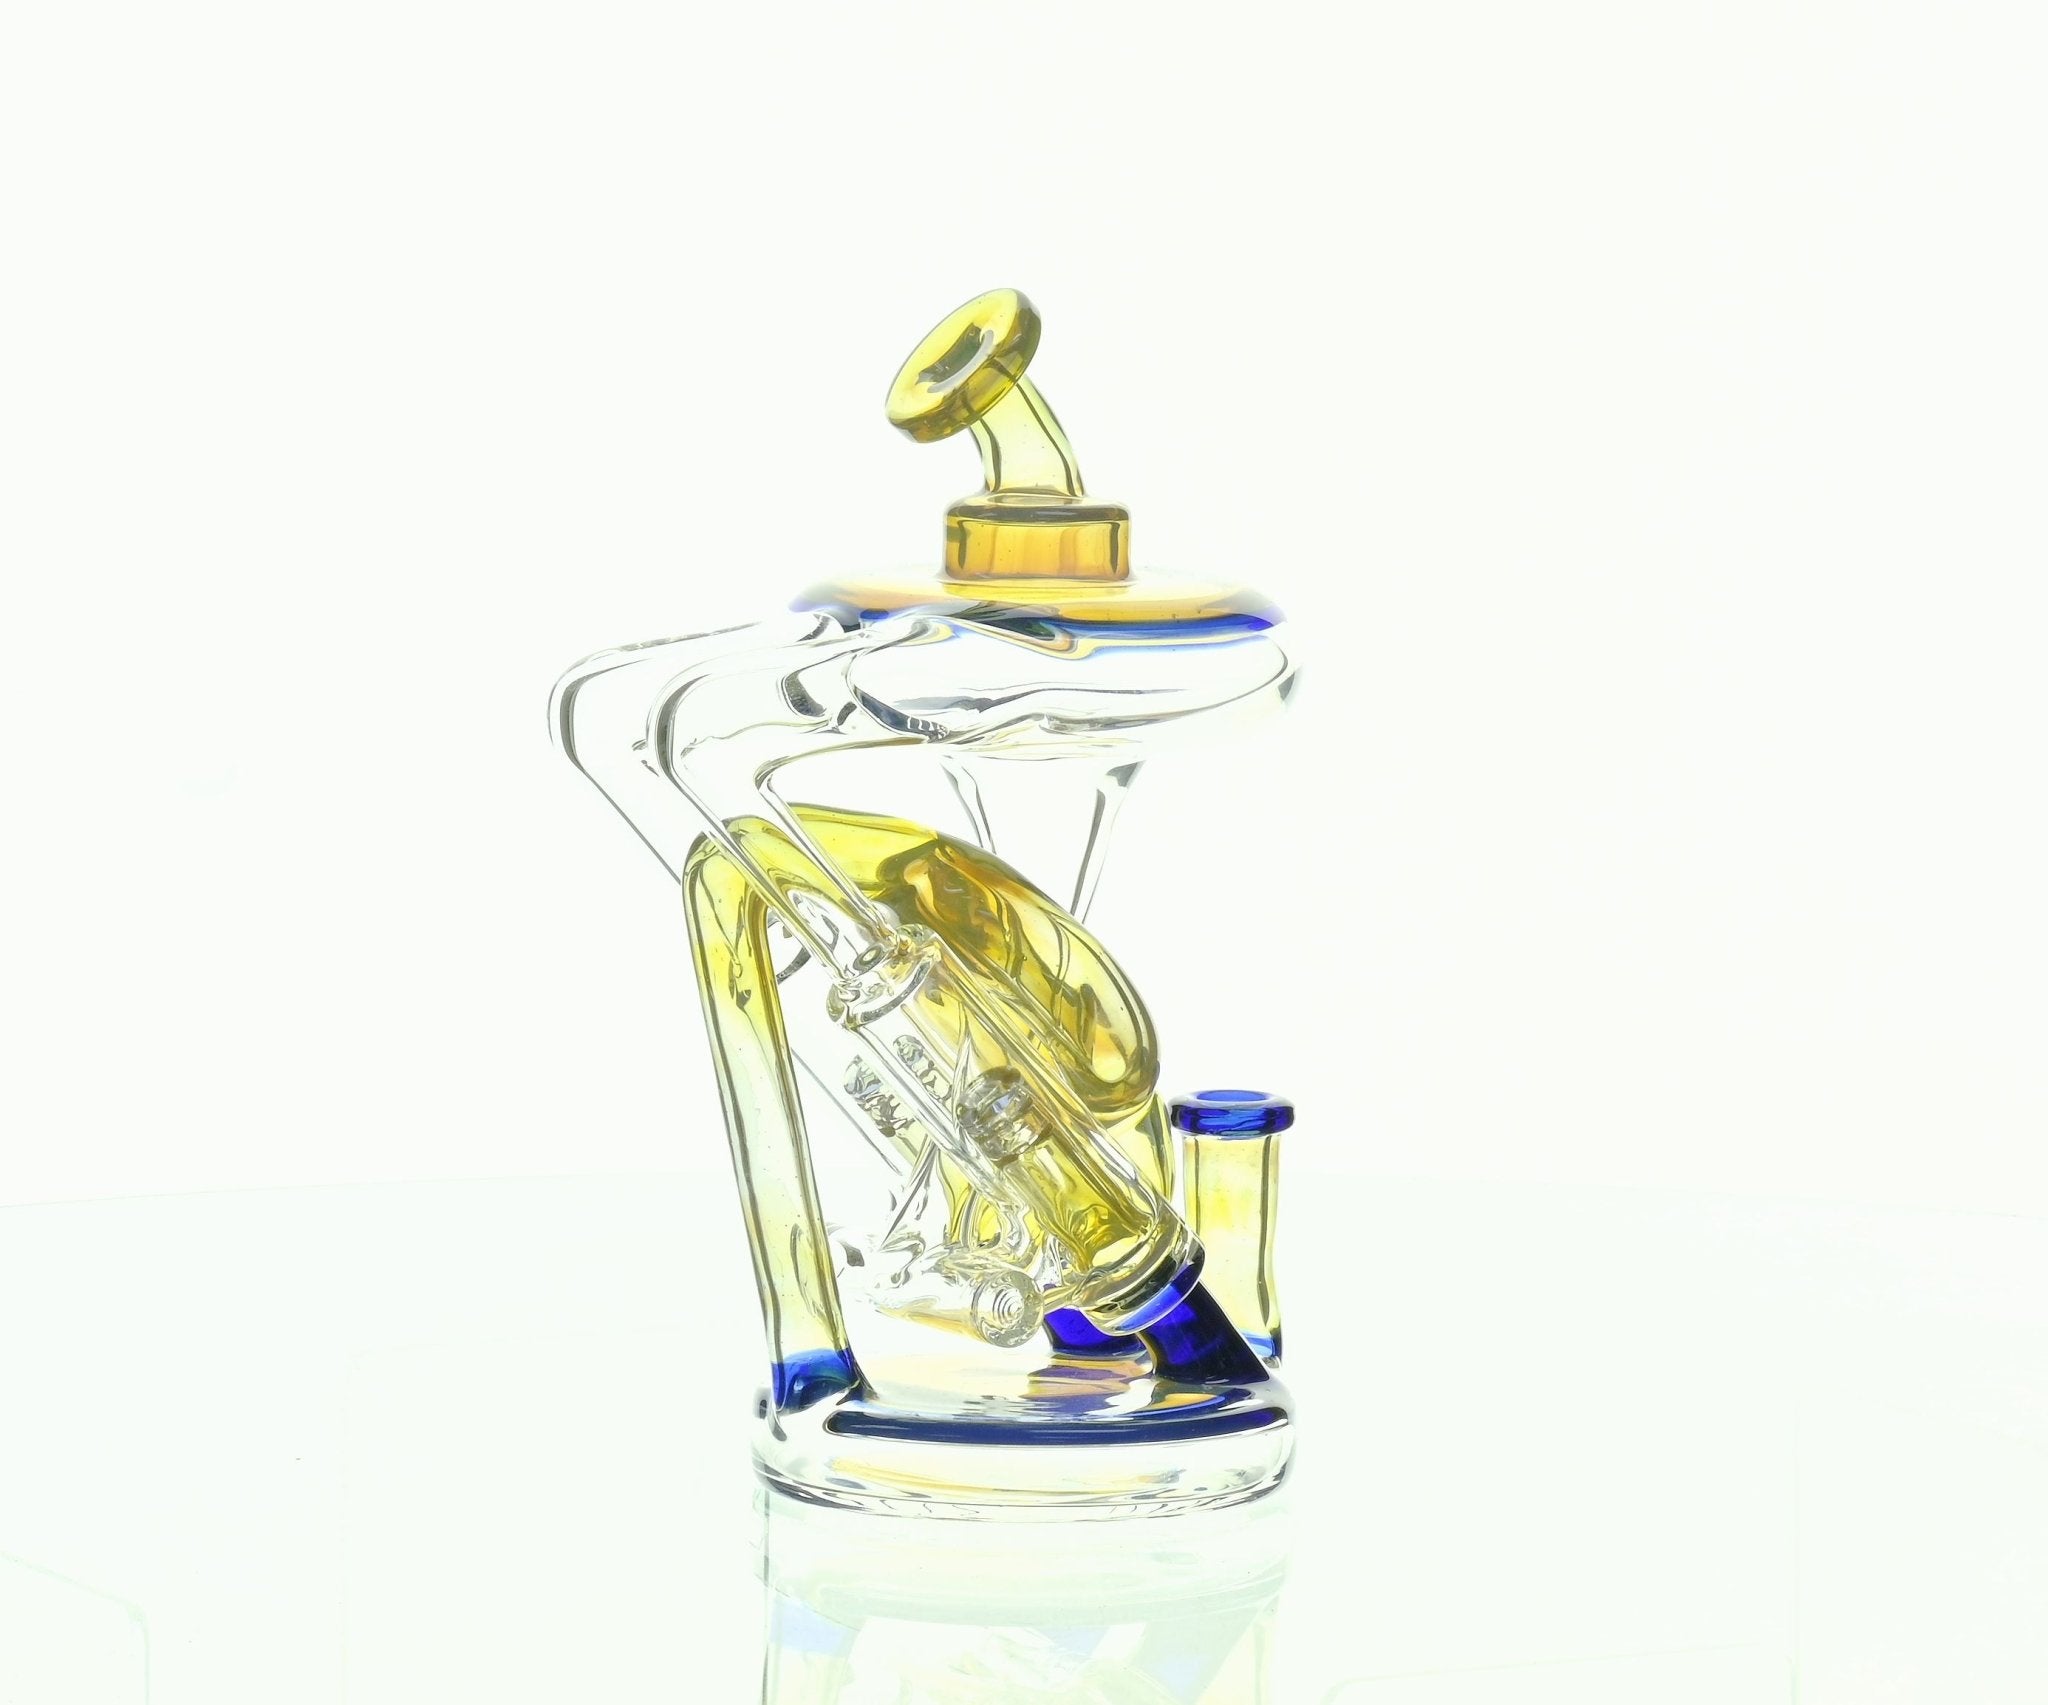 NIB GLASS PARTIAL COLOR PISTON RIG EXTRA LIGHT YELLOW/OPAL LAVENDER & BRILLIANT BLUE ACCENTS - SSSS